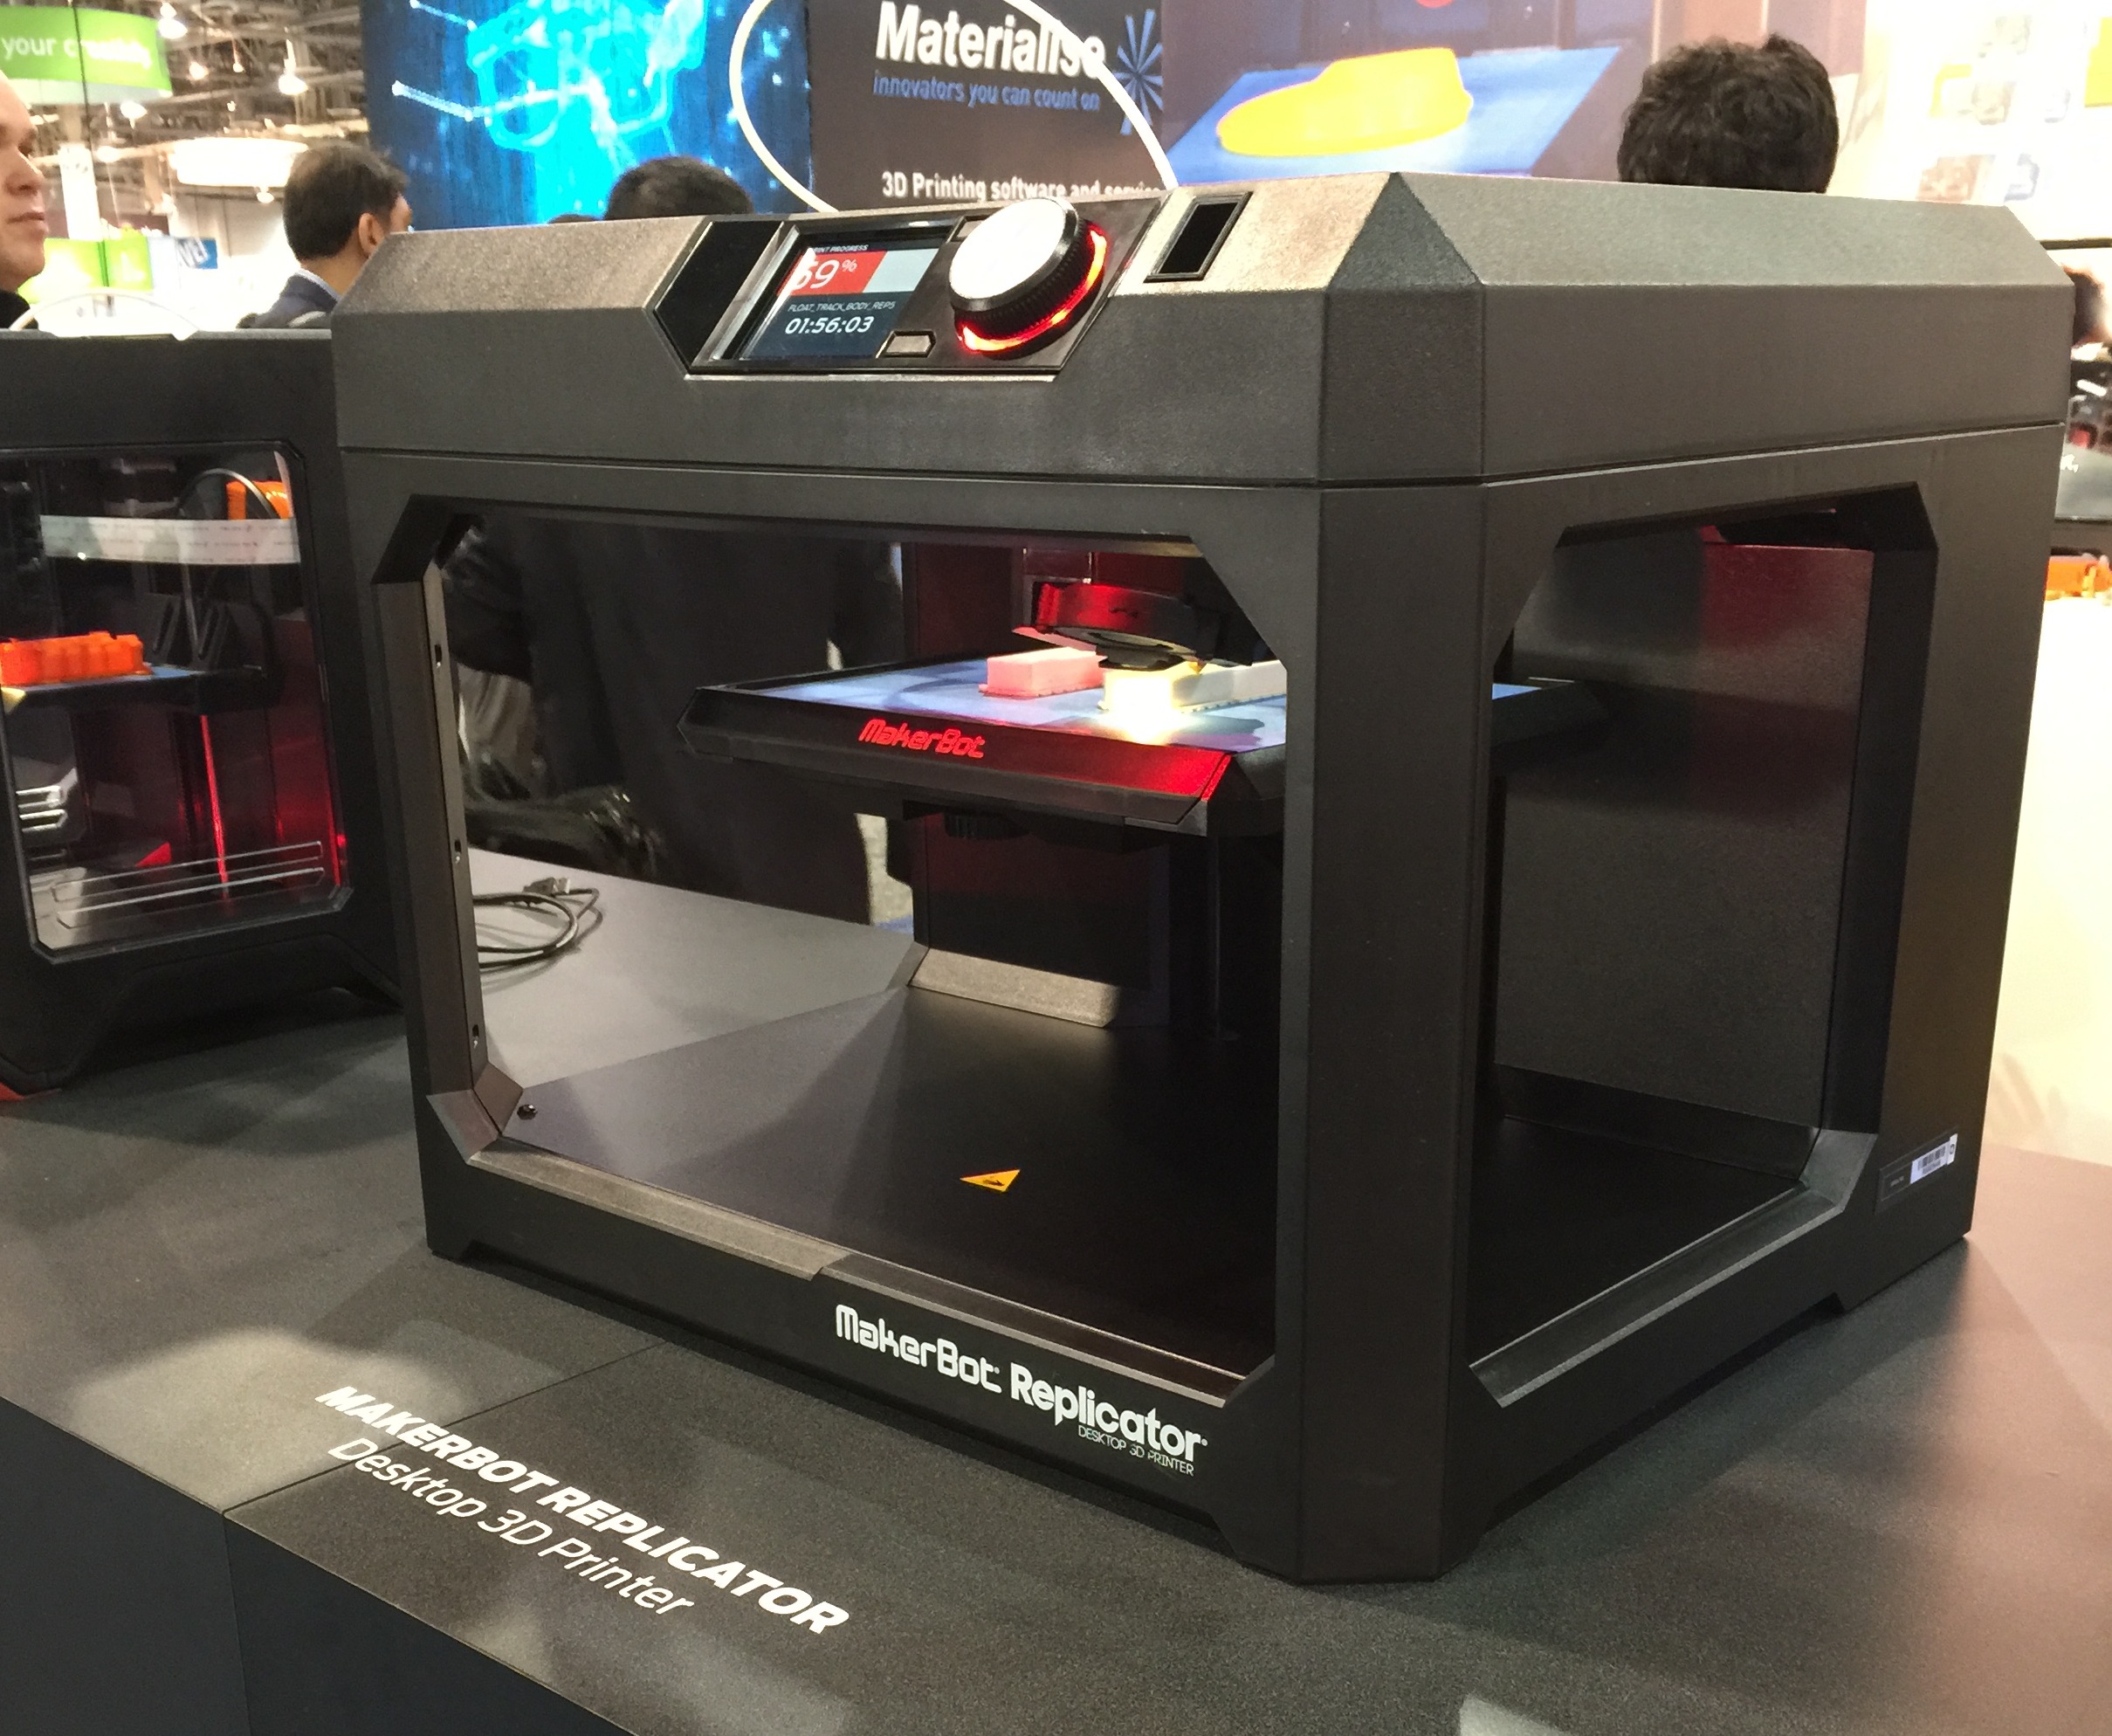 3D Printers: Should They Be In Every Consumer's Home? - Img 2421